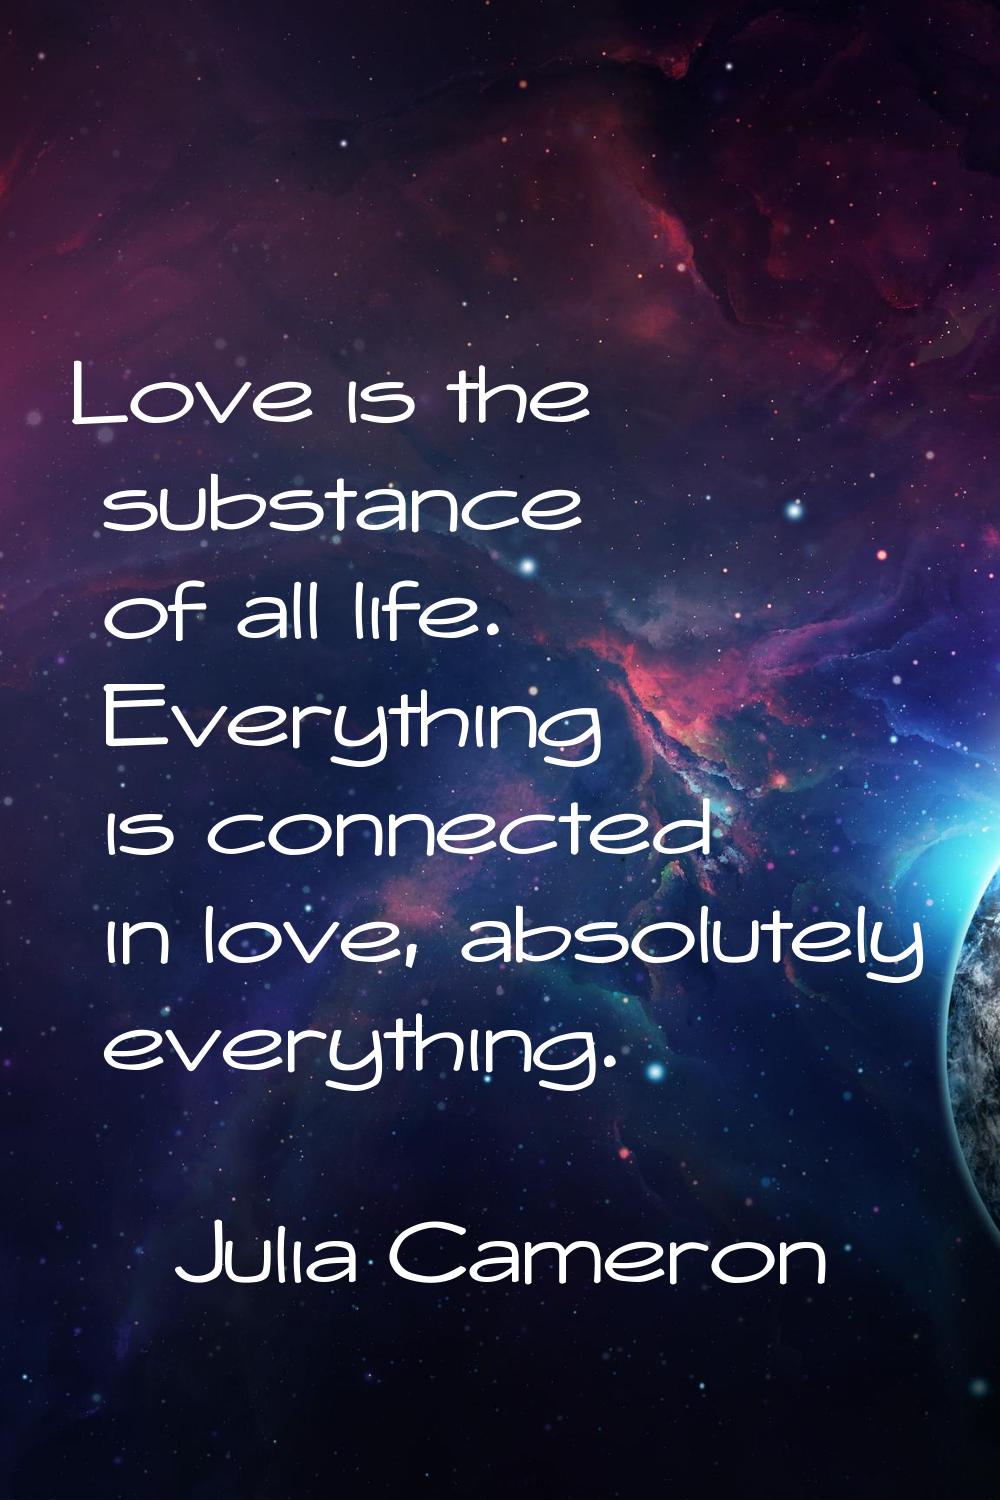 Love is the substance of all life. Everything is connected in love, absolutely everything.